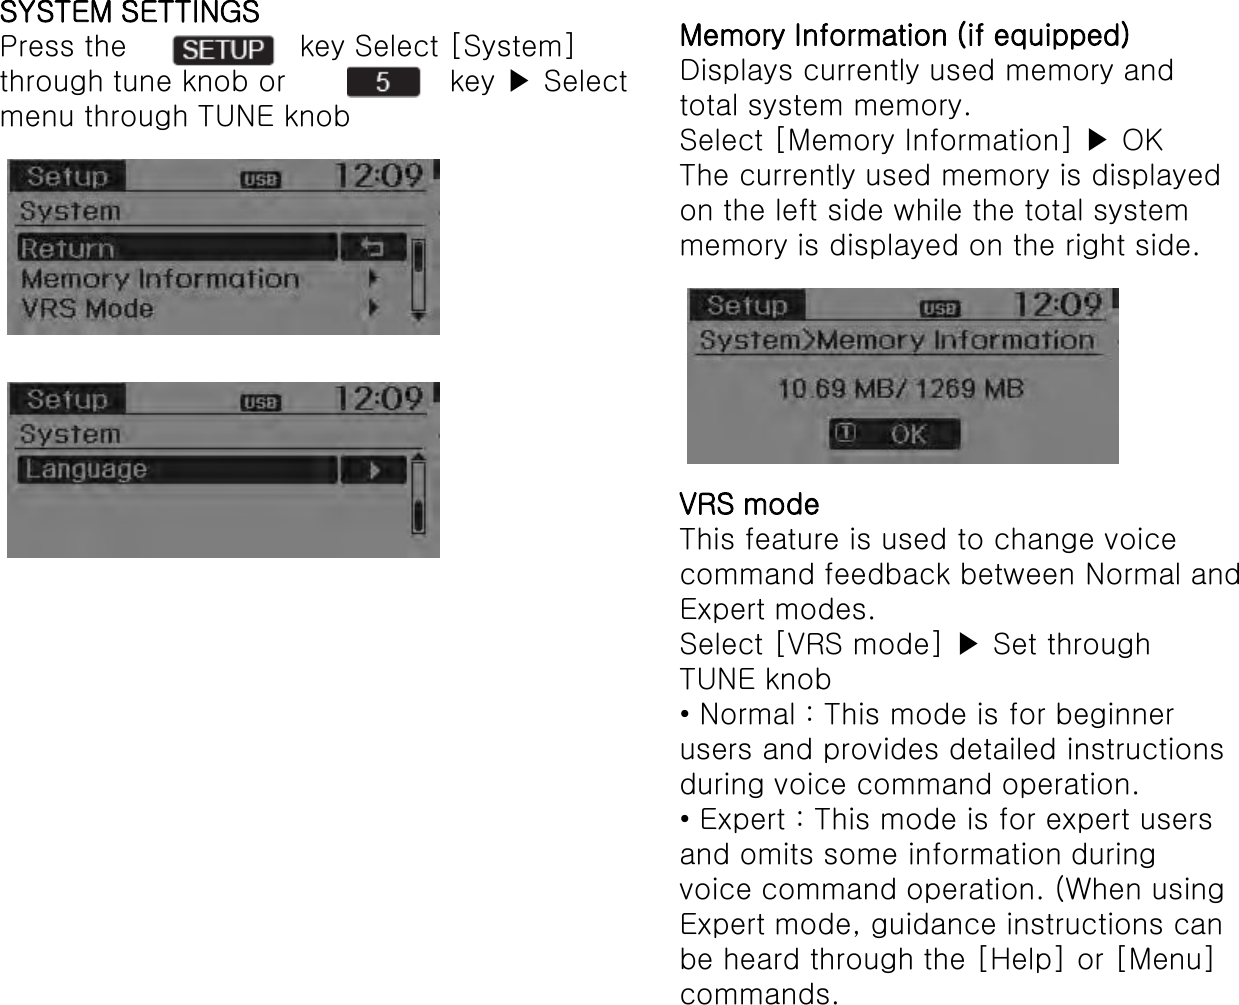 SYSTEM SETTINGS Press the     key Select [System] through tune knob or  key ▶ Select menu through TUNE knob Memory Information (if equipped) Displays currently used memory and total system memory. Select [Memory Information] ▶ OK The currently used memory is displayed on the left side while the total system memory is displayed on the right side. VRS mode This feature is used to change voice command feedback between Normal and Expert modes. Select [VRS mode] ▶ Set through TUNE knob • Normal : This mode is for beginnerusers and provides detailed instructions during voice command operation. • Expert : This mode is for expert usersand omits some information during voice command operation. (When using Expert mode, guidance instructions can be heard through the [Help] or [Menu] commands. 